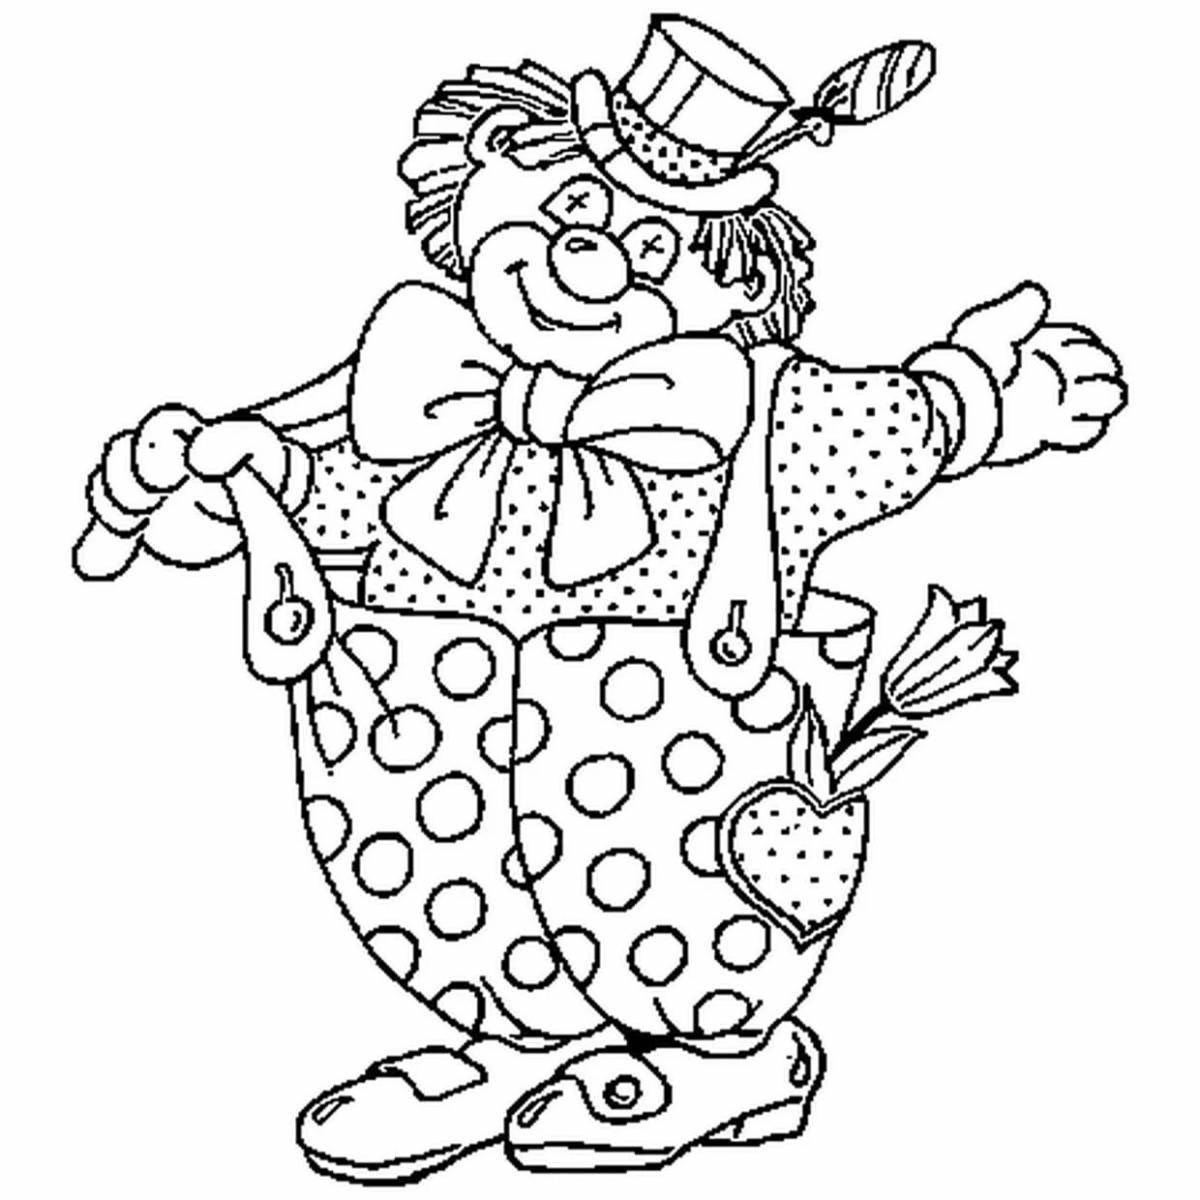 Attractive clown coloring for kids